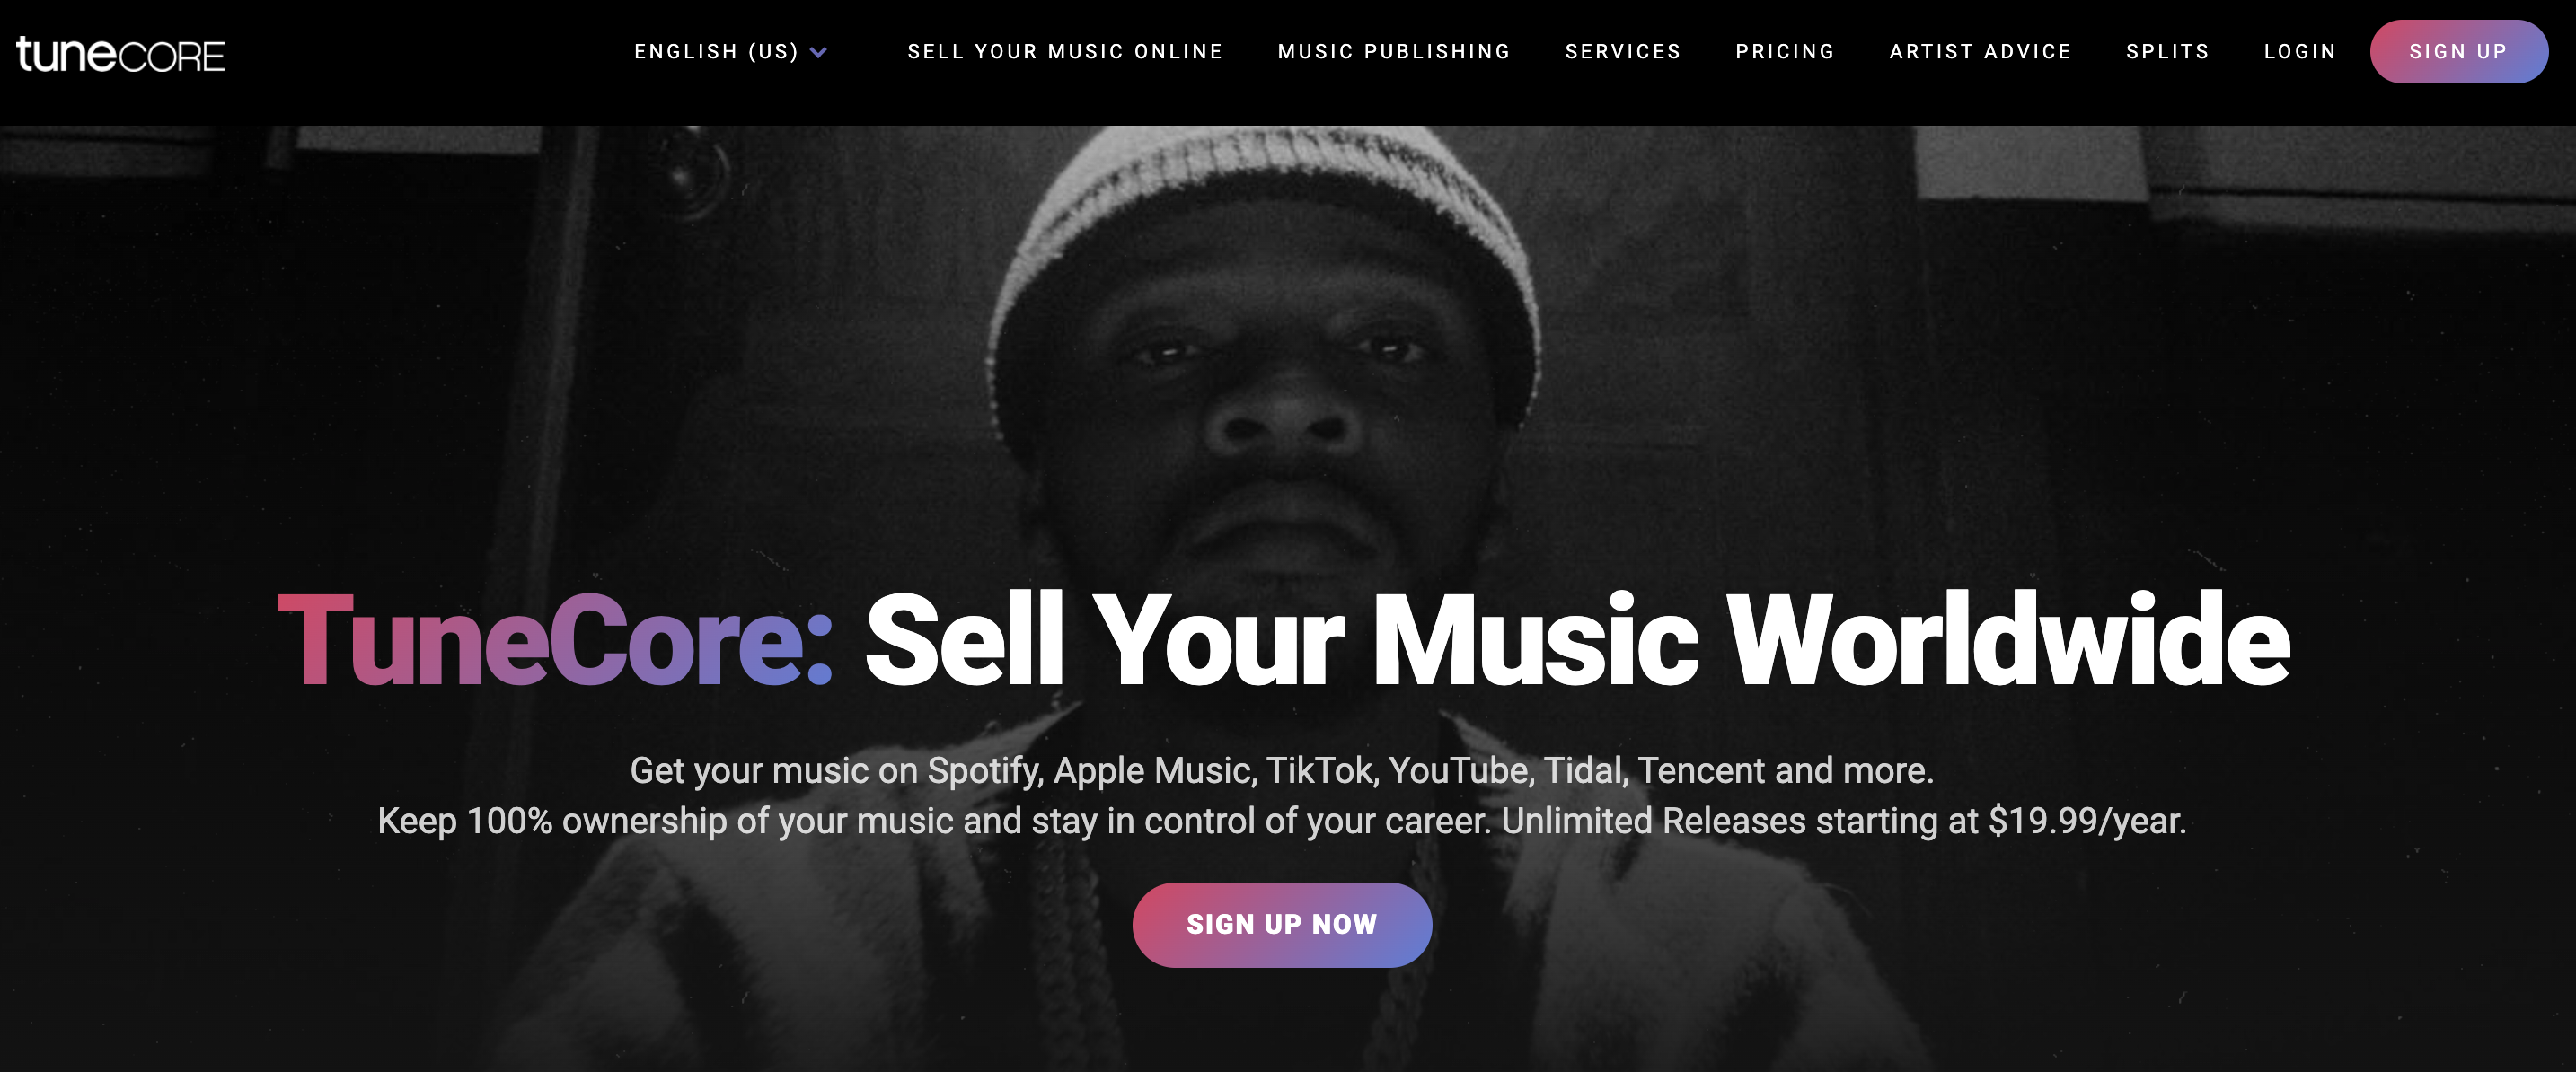 SCreenshot of Web page header for TuneCore featuring an image of a person wearing a beanie and headphones with text promoting music distribution services.